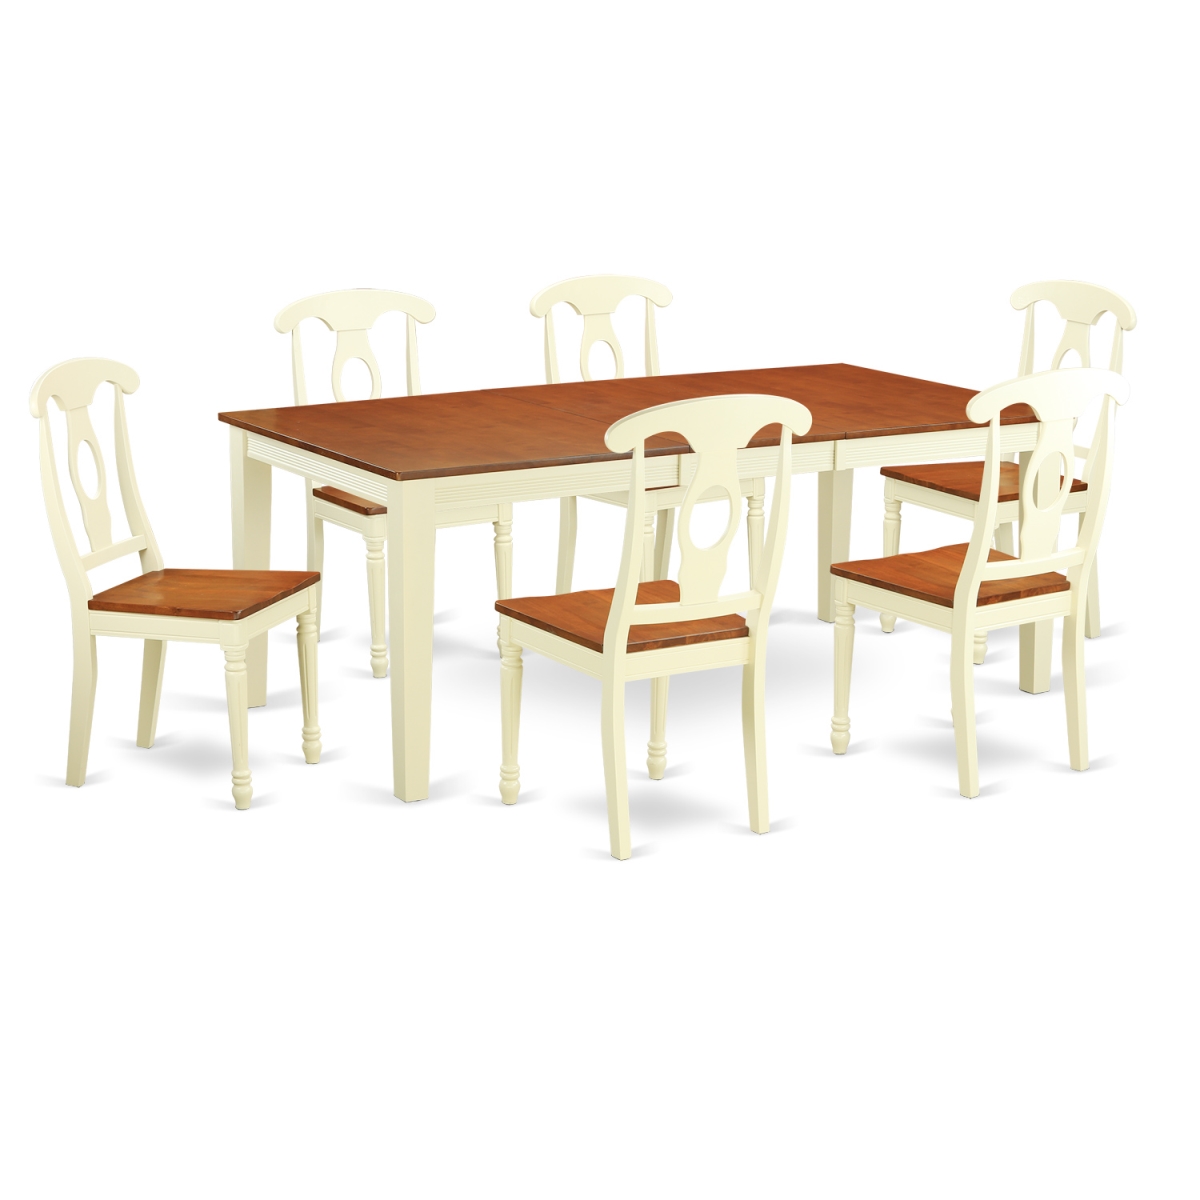 QUKE7-WHI-W Kitchen Nook Dining Set - Dining Room Table & 6 Chairs, Buttermilk & Cherry - 7 Piece -  East West Furniture